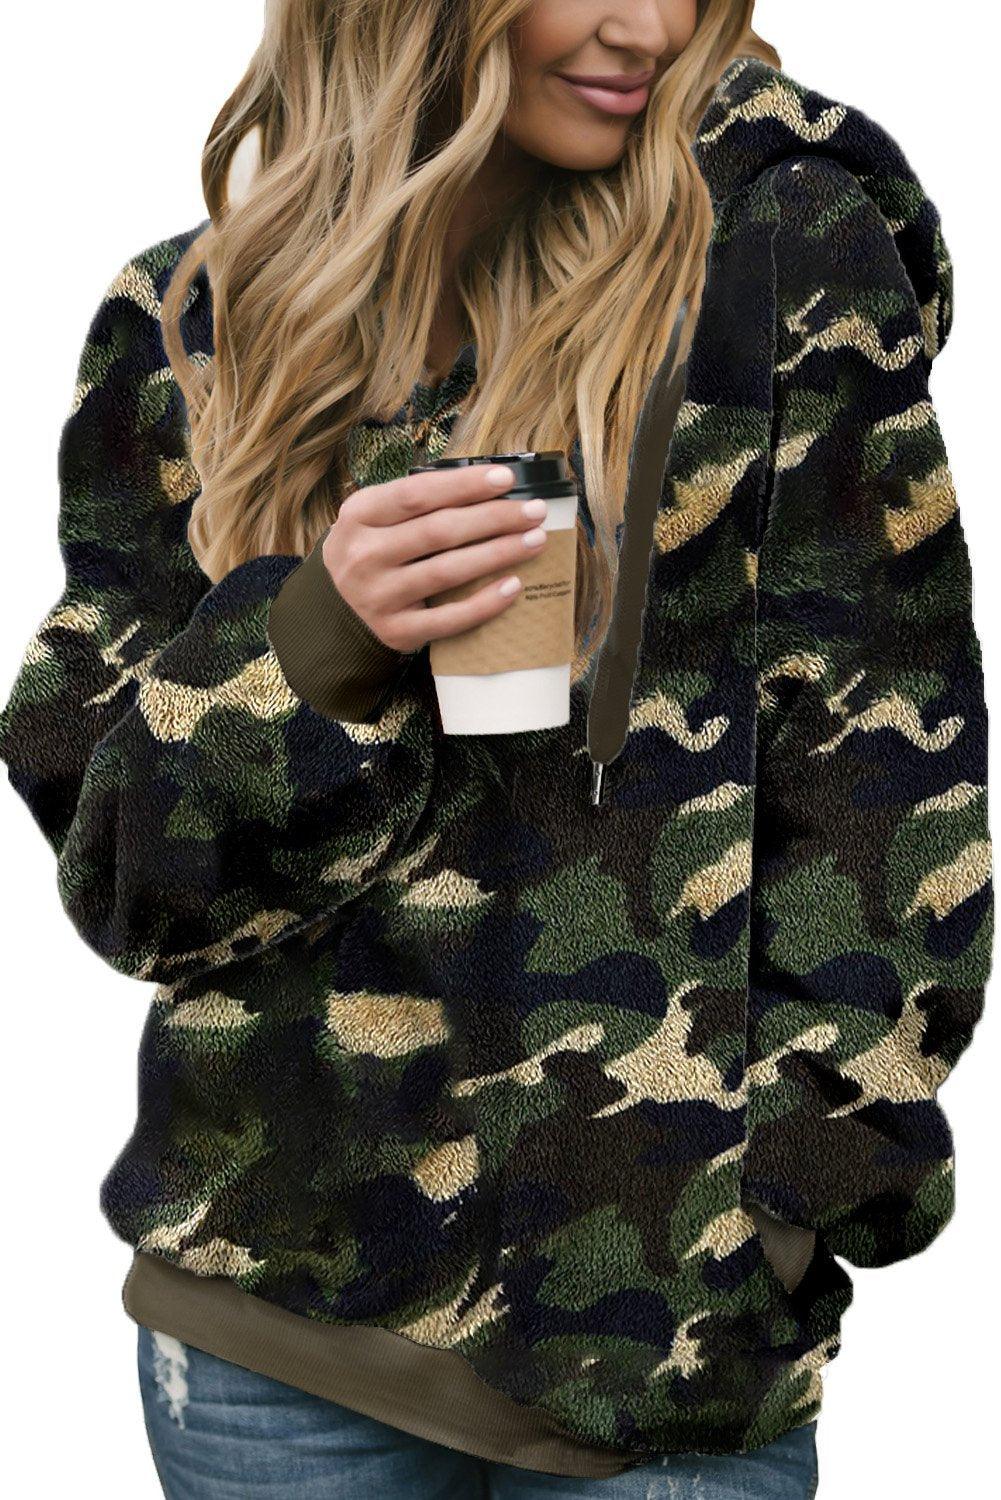 Women's Winter Green Camo Print Warm Furry Pullover Hoodie - VirtuousWares:Global